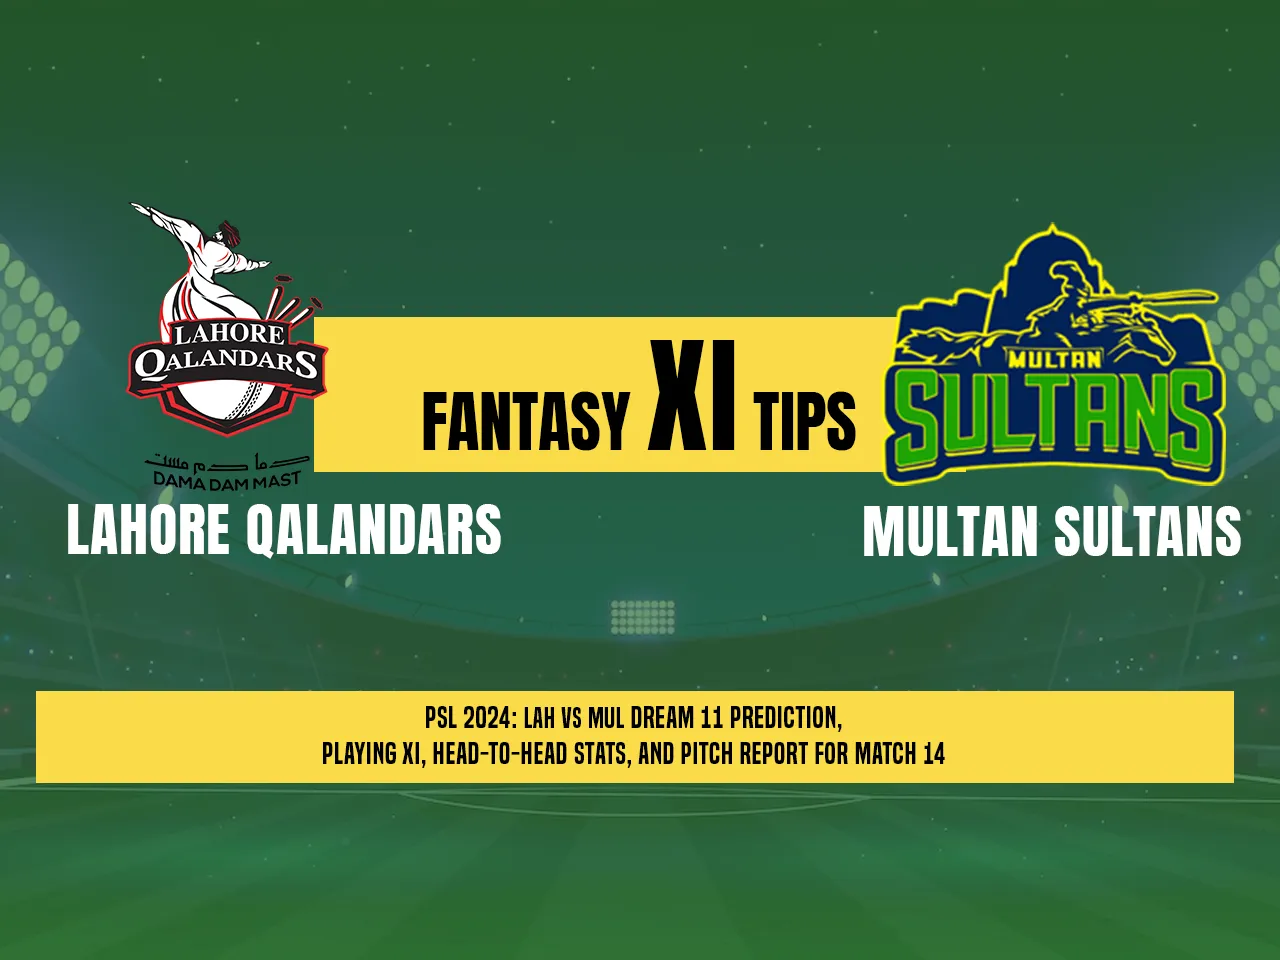 PSL 2024: LAH vs MUL Dream11 Prediction, Playing XI, Head-to-Head Stats, and Pitch Report for 14th Match